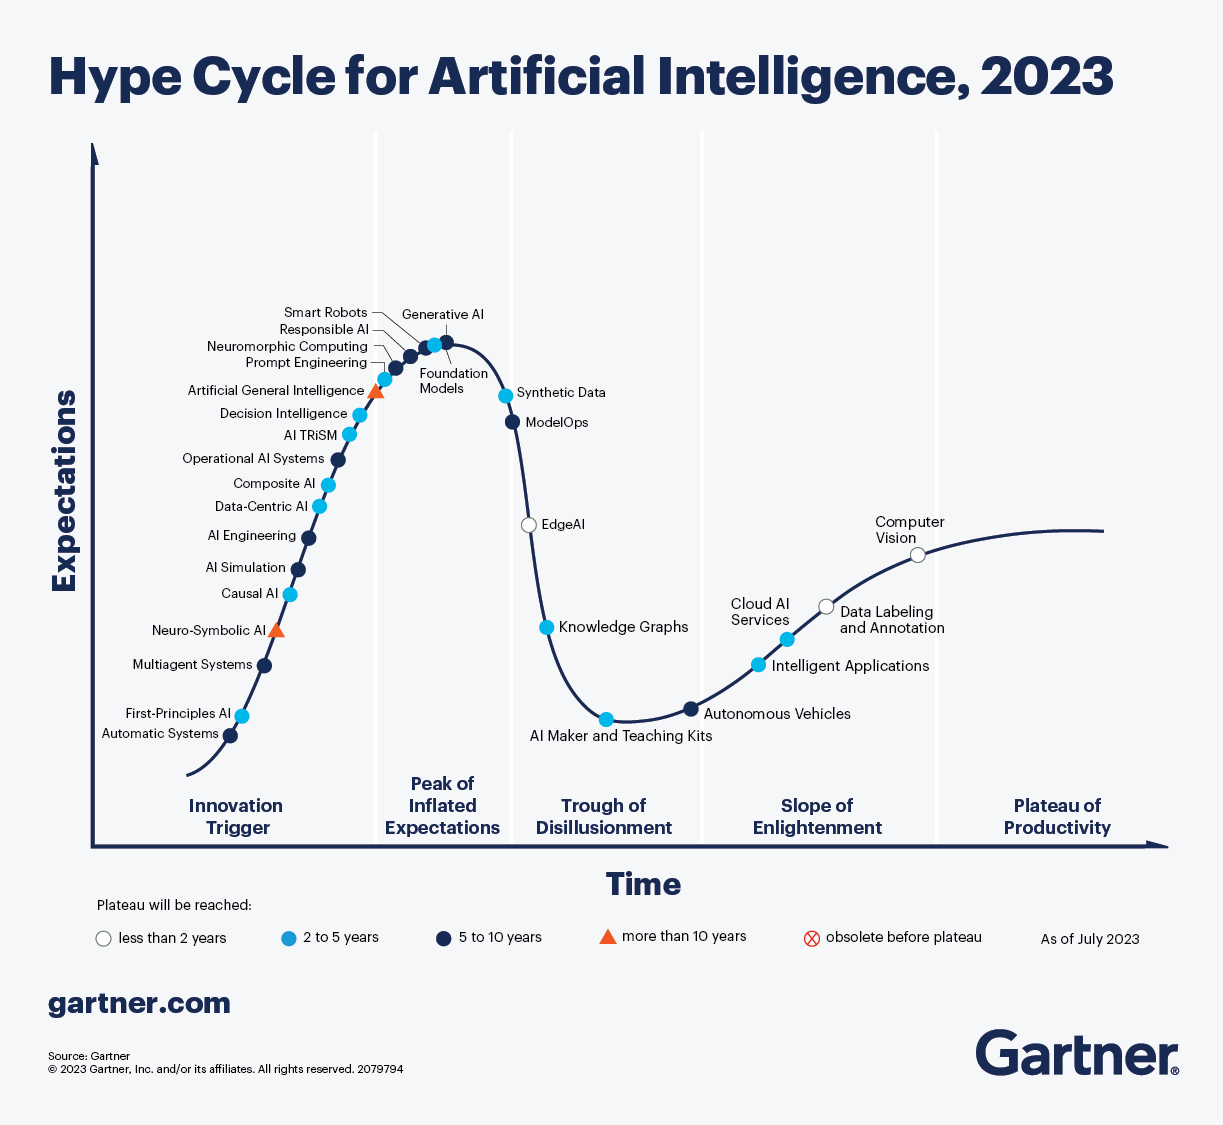 Hype Cycle for Artificial Intelligence, 2023